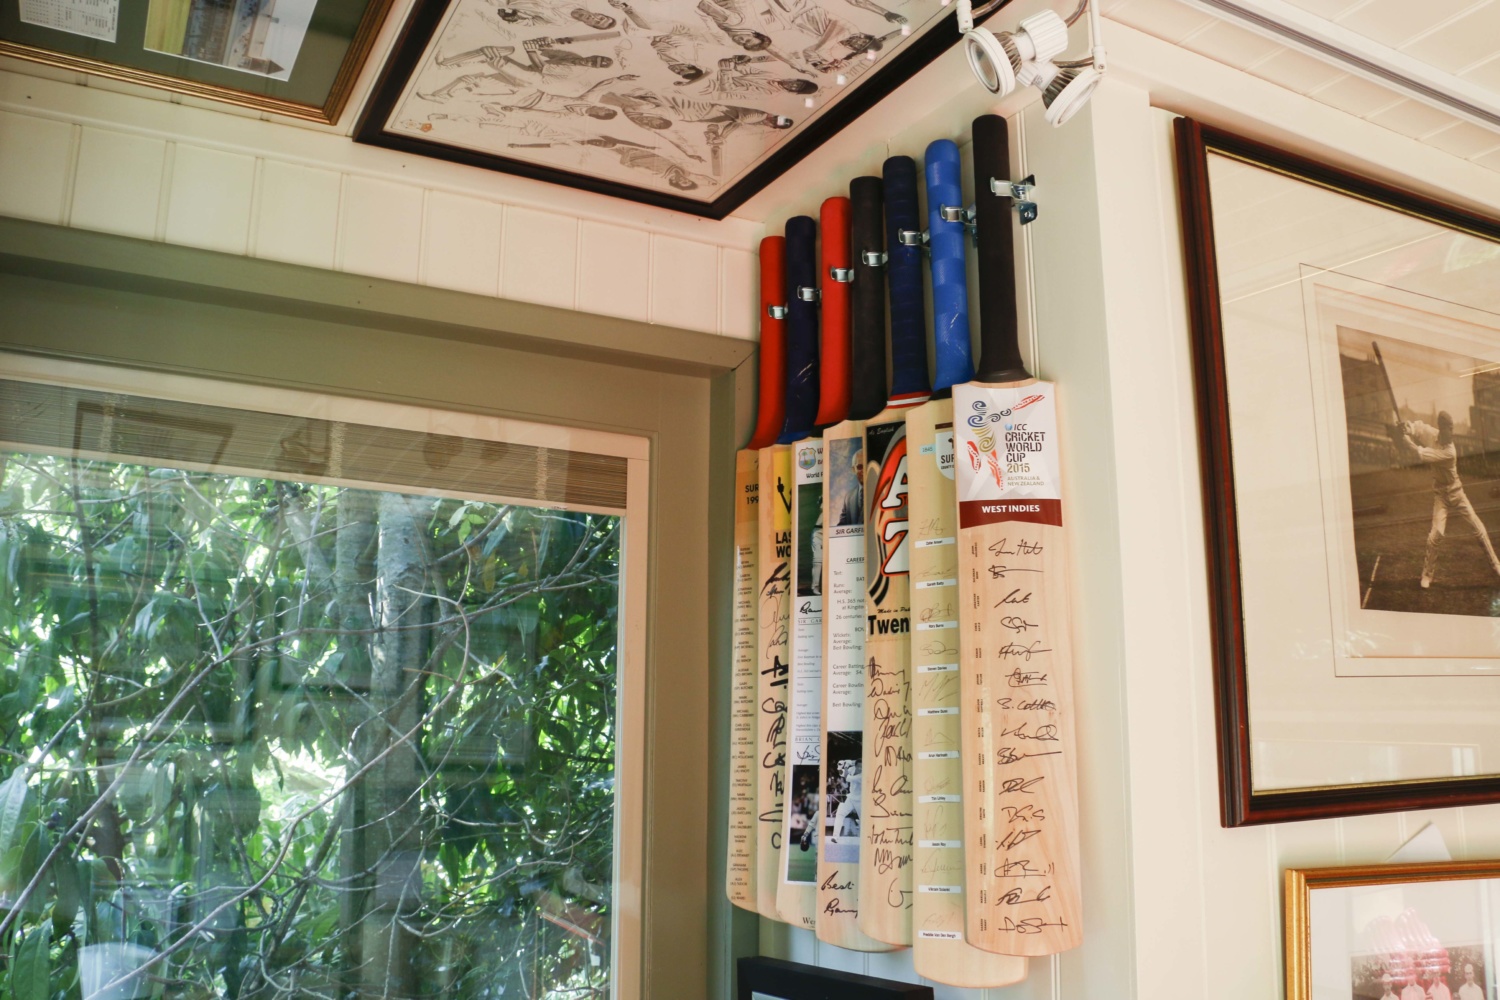 We visit a customer who uses their garden studio to house his vast collection of sports memorabilia